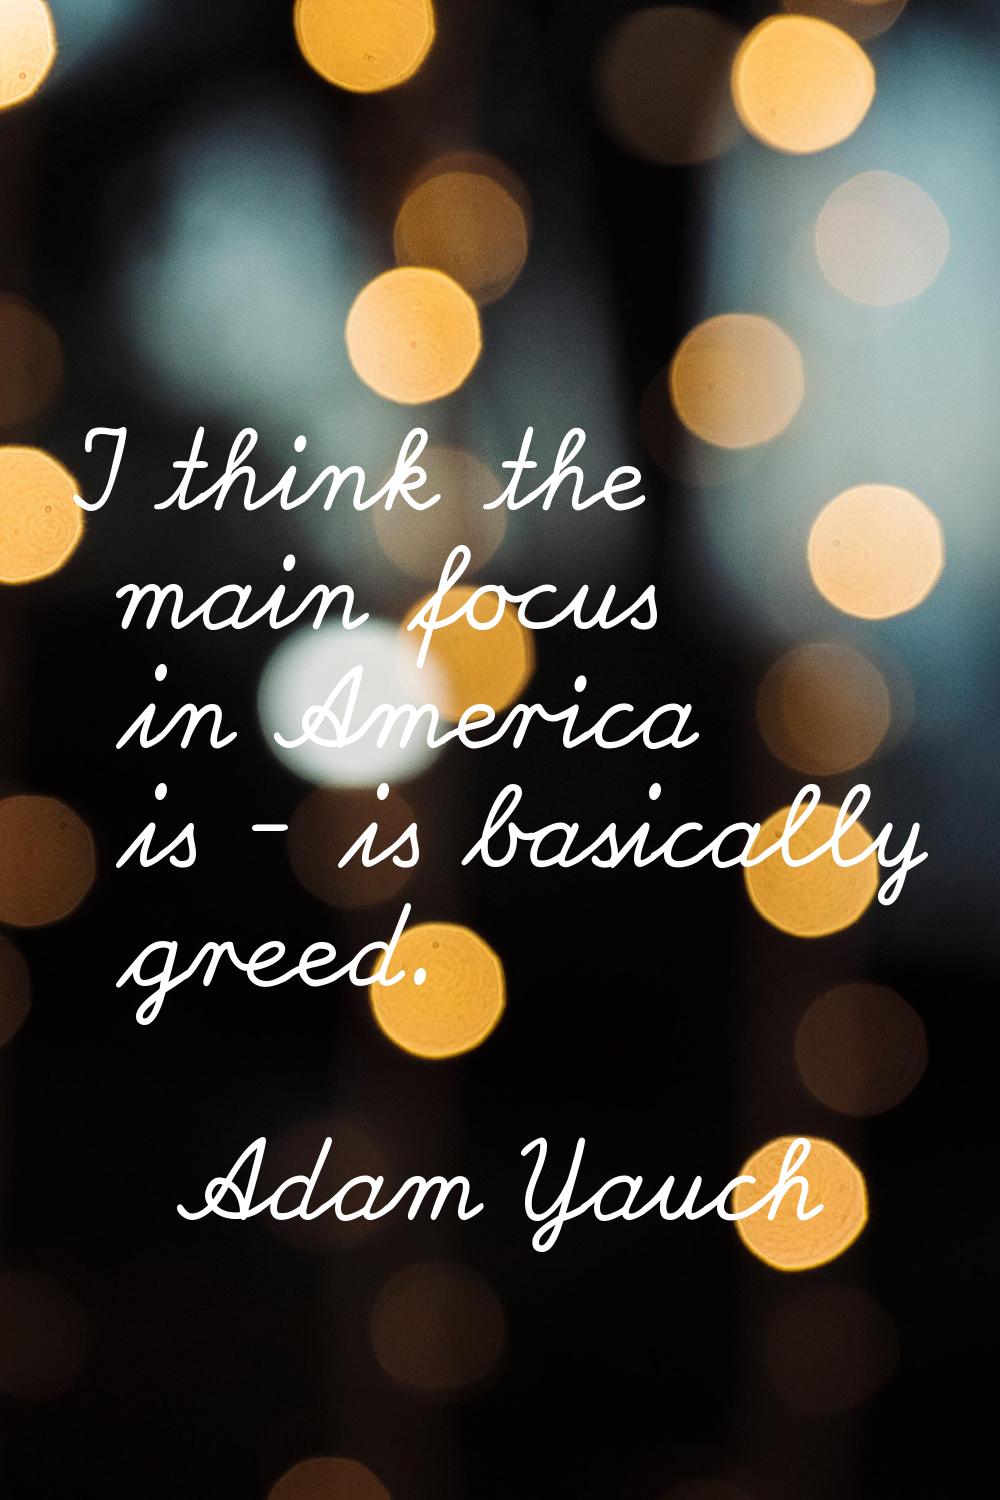 I think the main focus in America is - is basically greed.